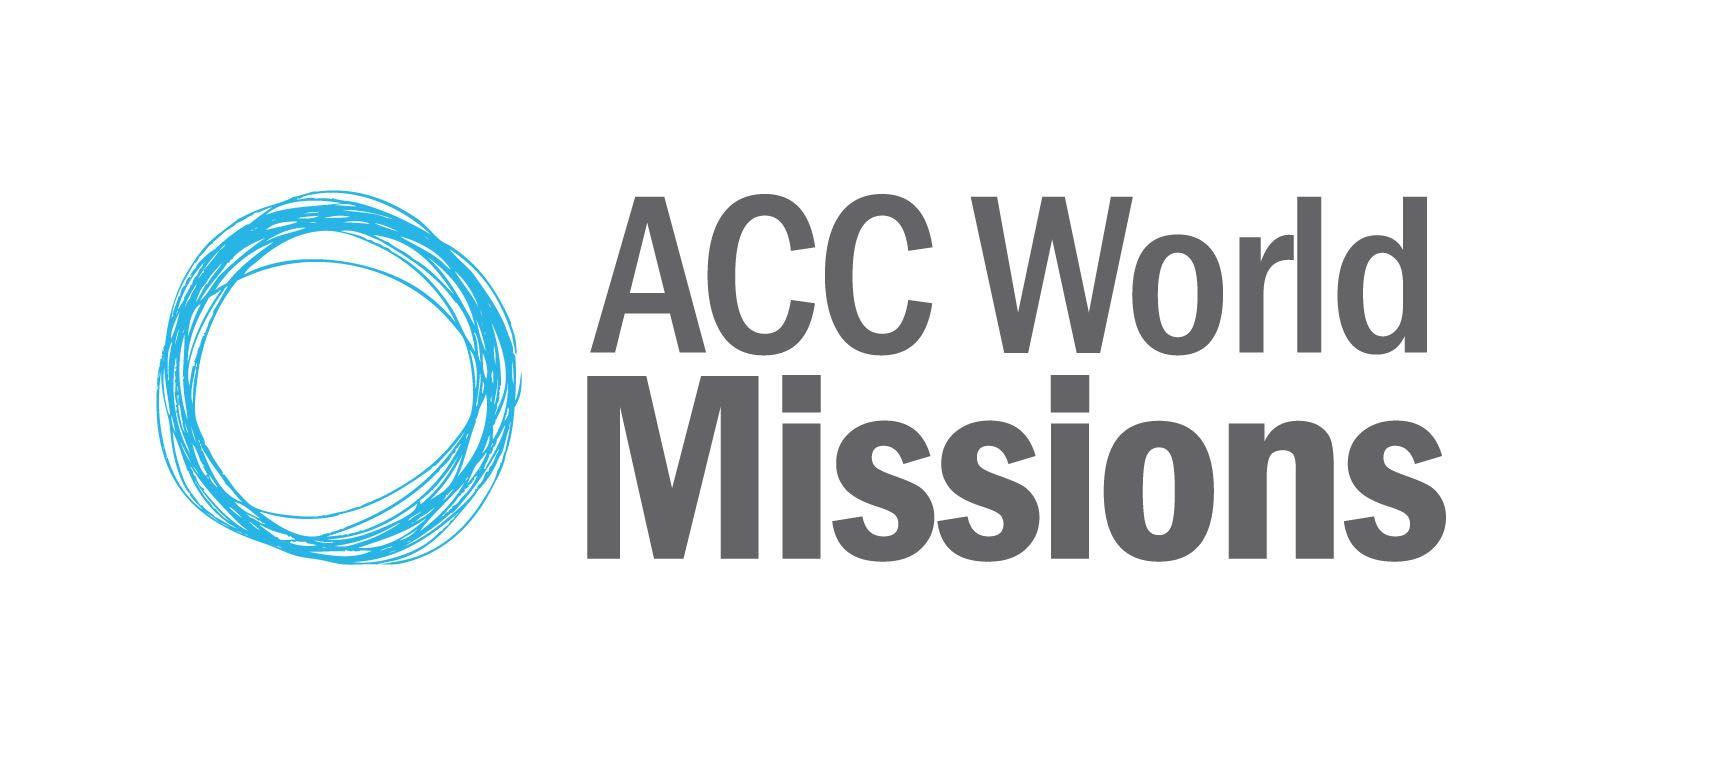 Red Knot Logo - Non Profit Logo Design For ACC World Missions By Red Knot Design